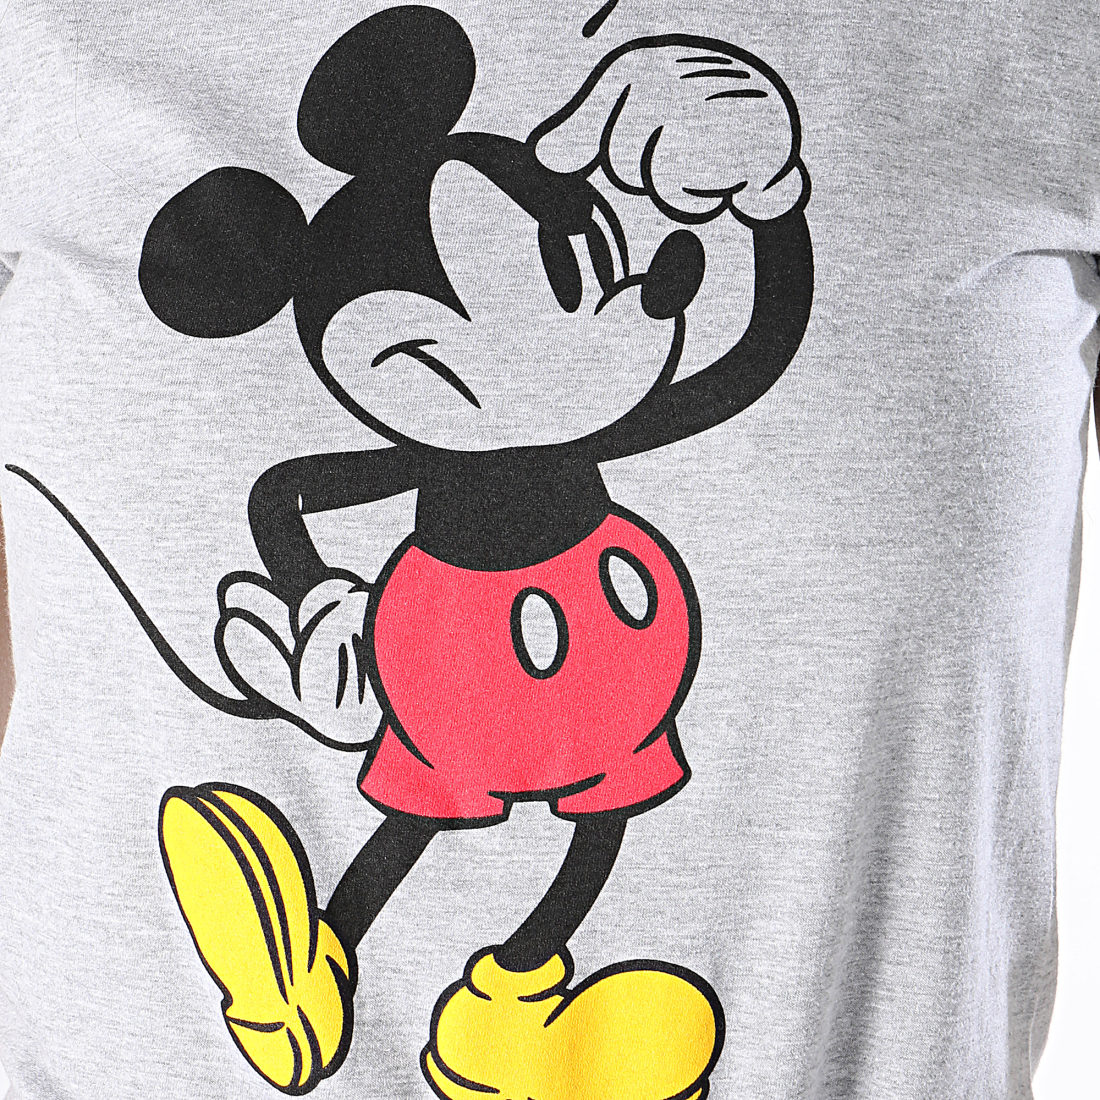 Mickey Mouse Tee Shirt Femme Annoying Face Gris Chiné